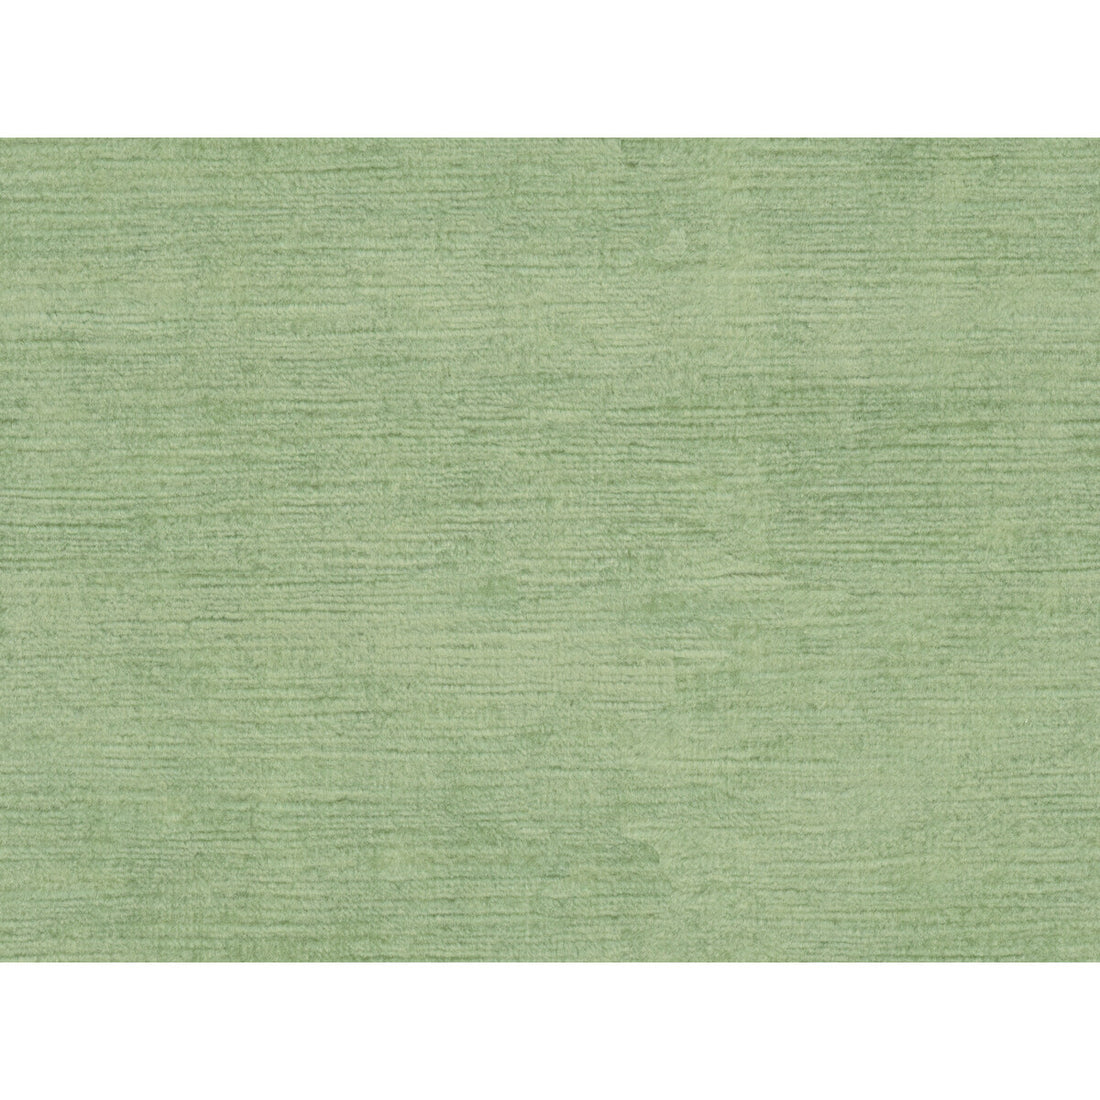 Fulham Linen V fabric in celadon color - pattern 2016133.230.0 - by Lee Jofa